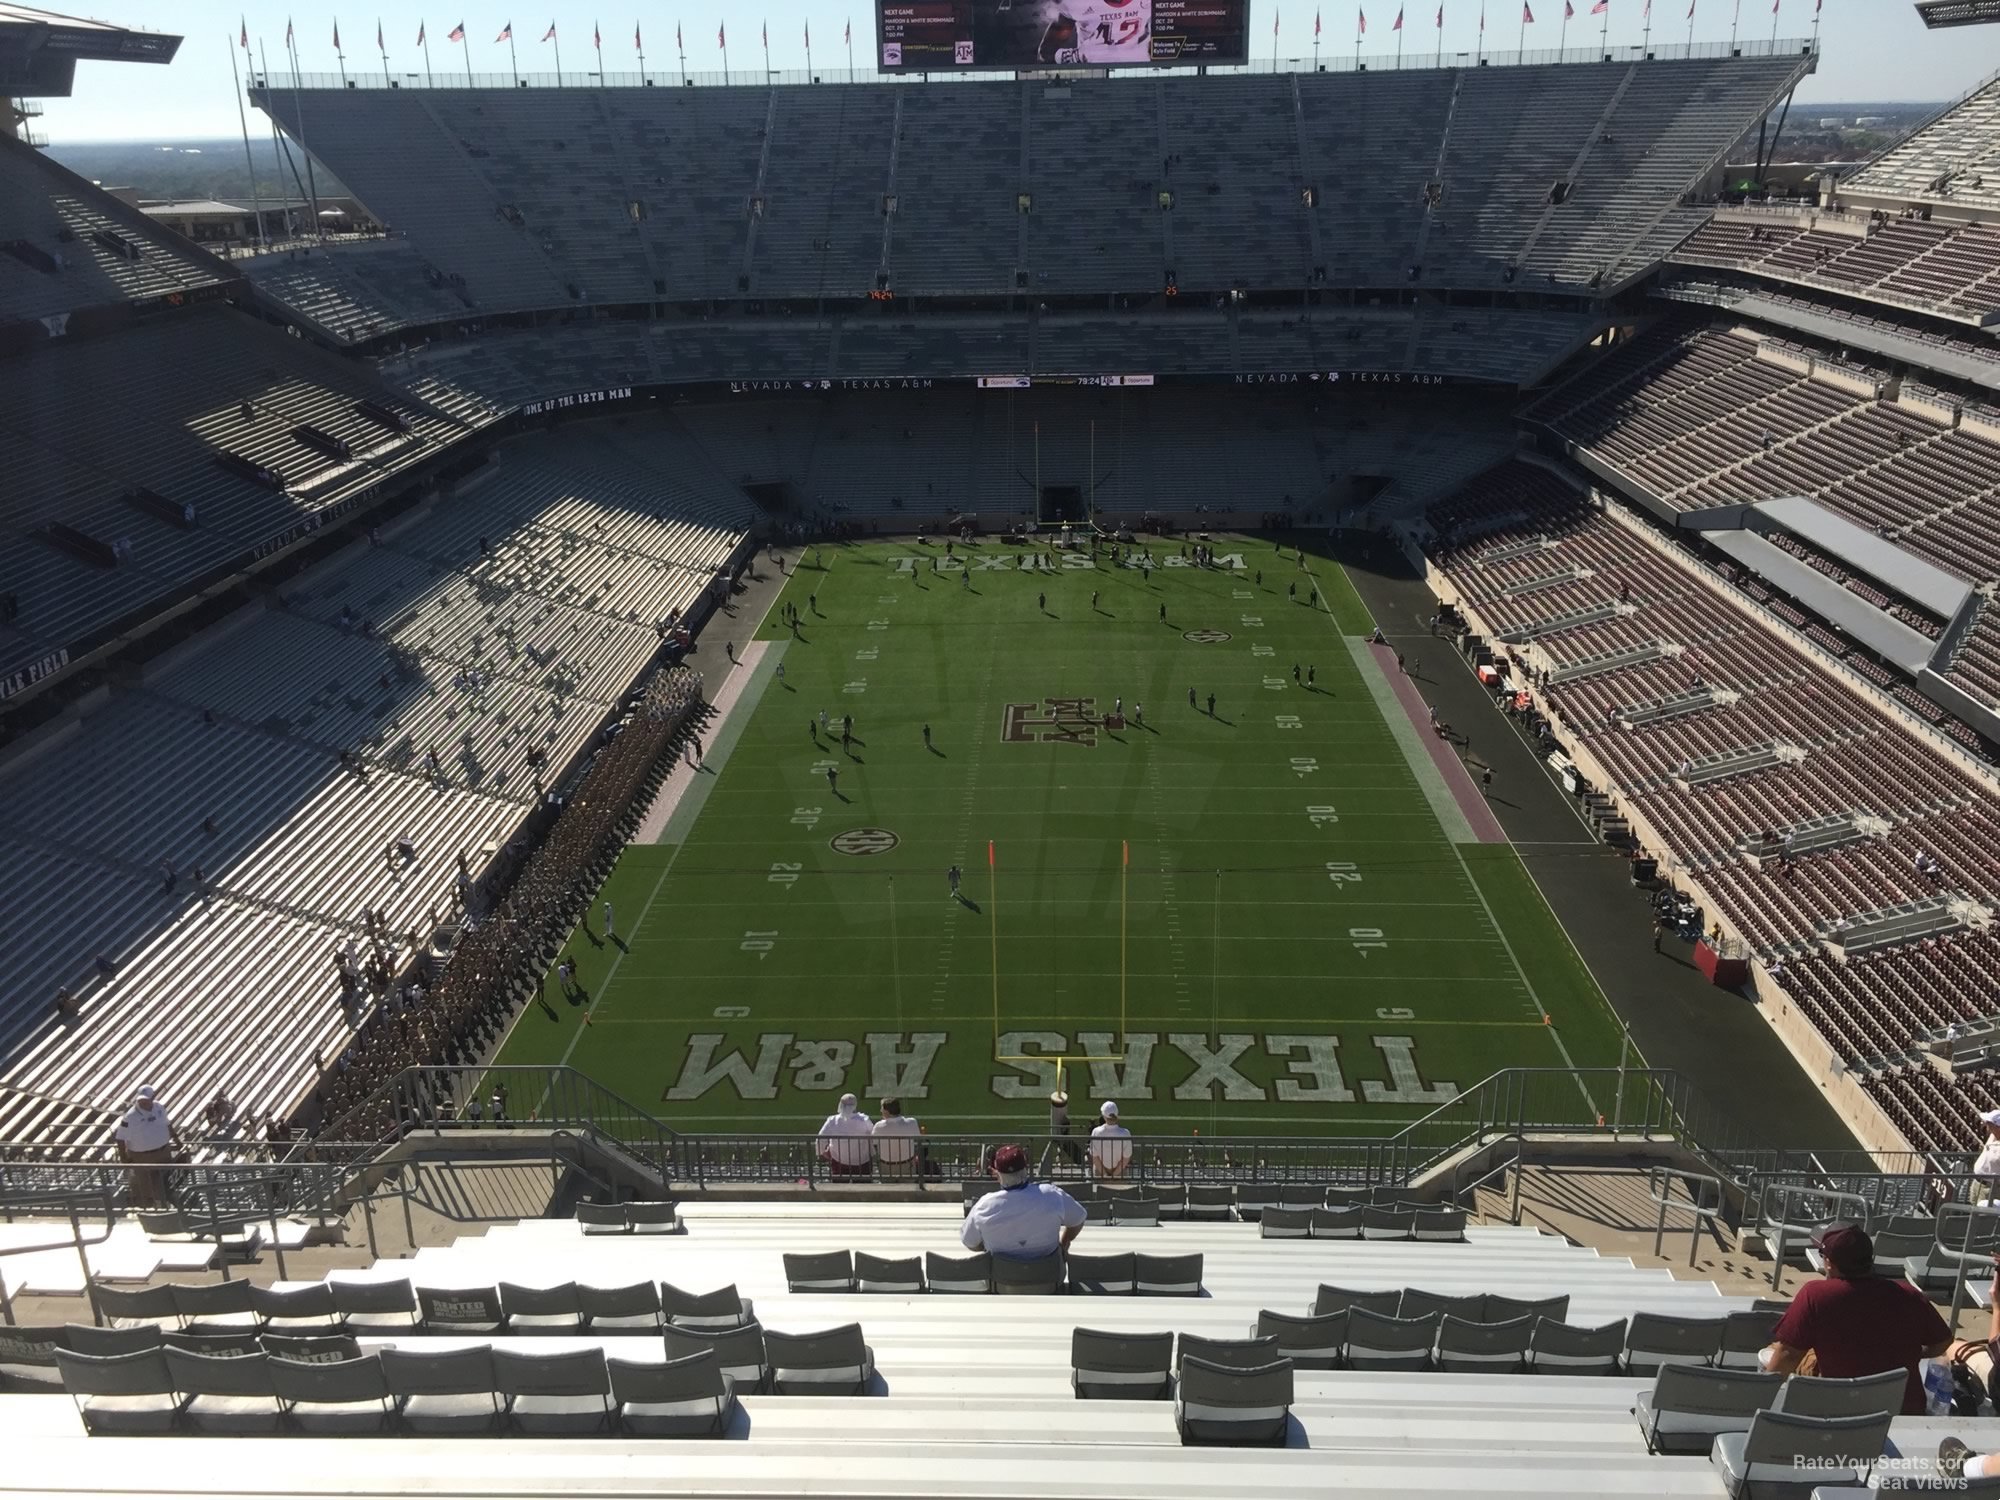 section 415, row 20 seat view  - kyle field